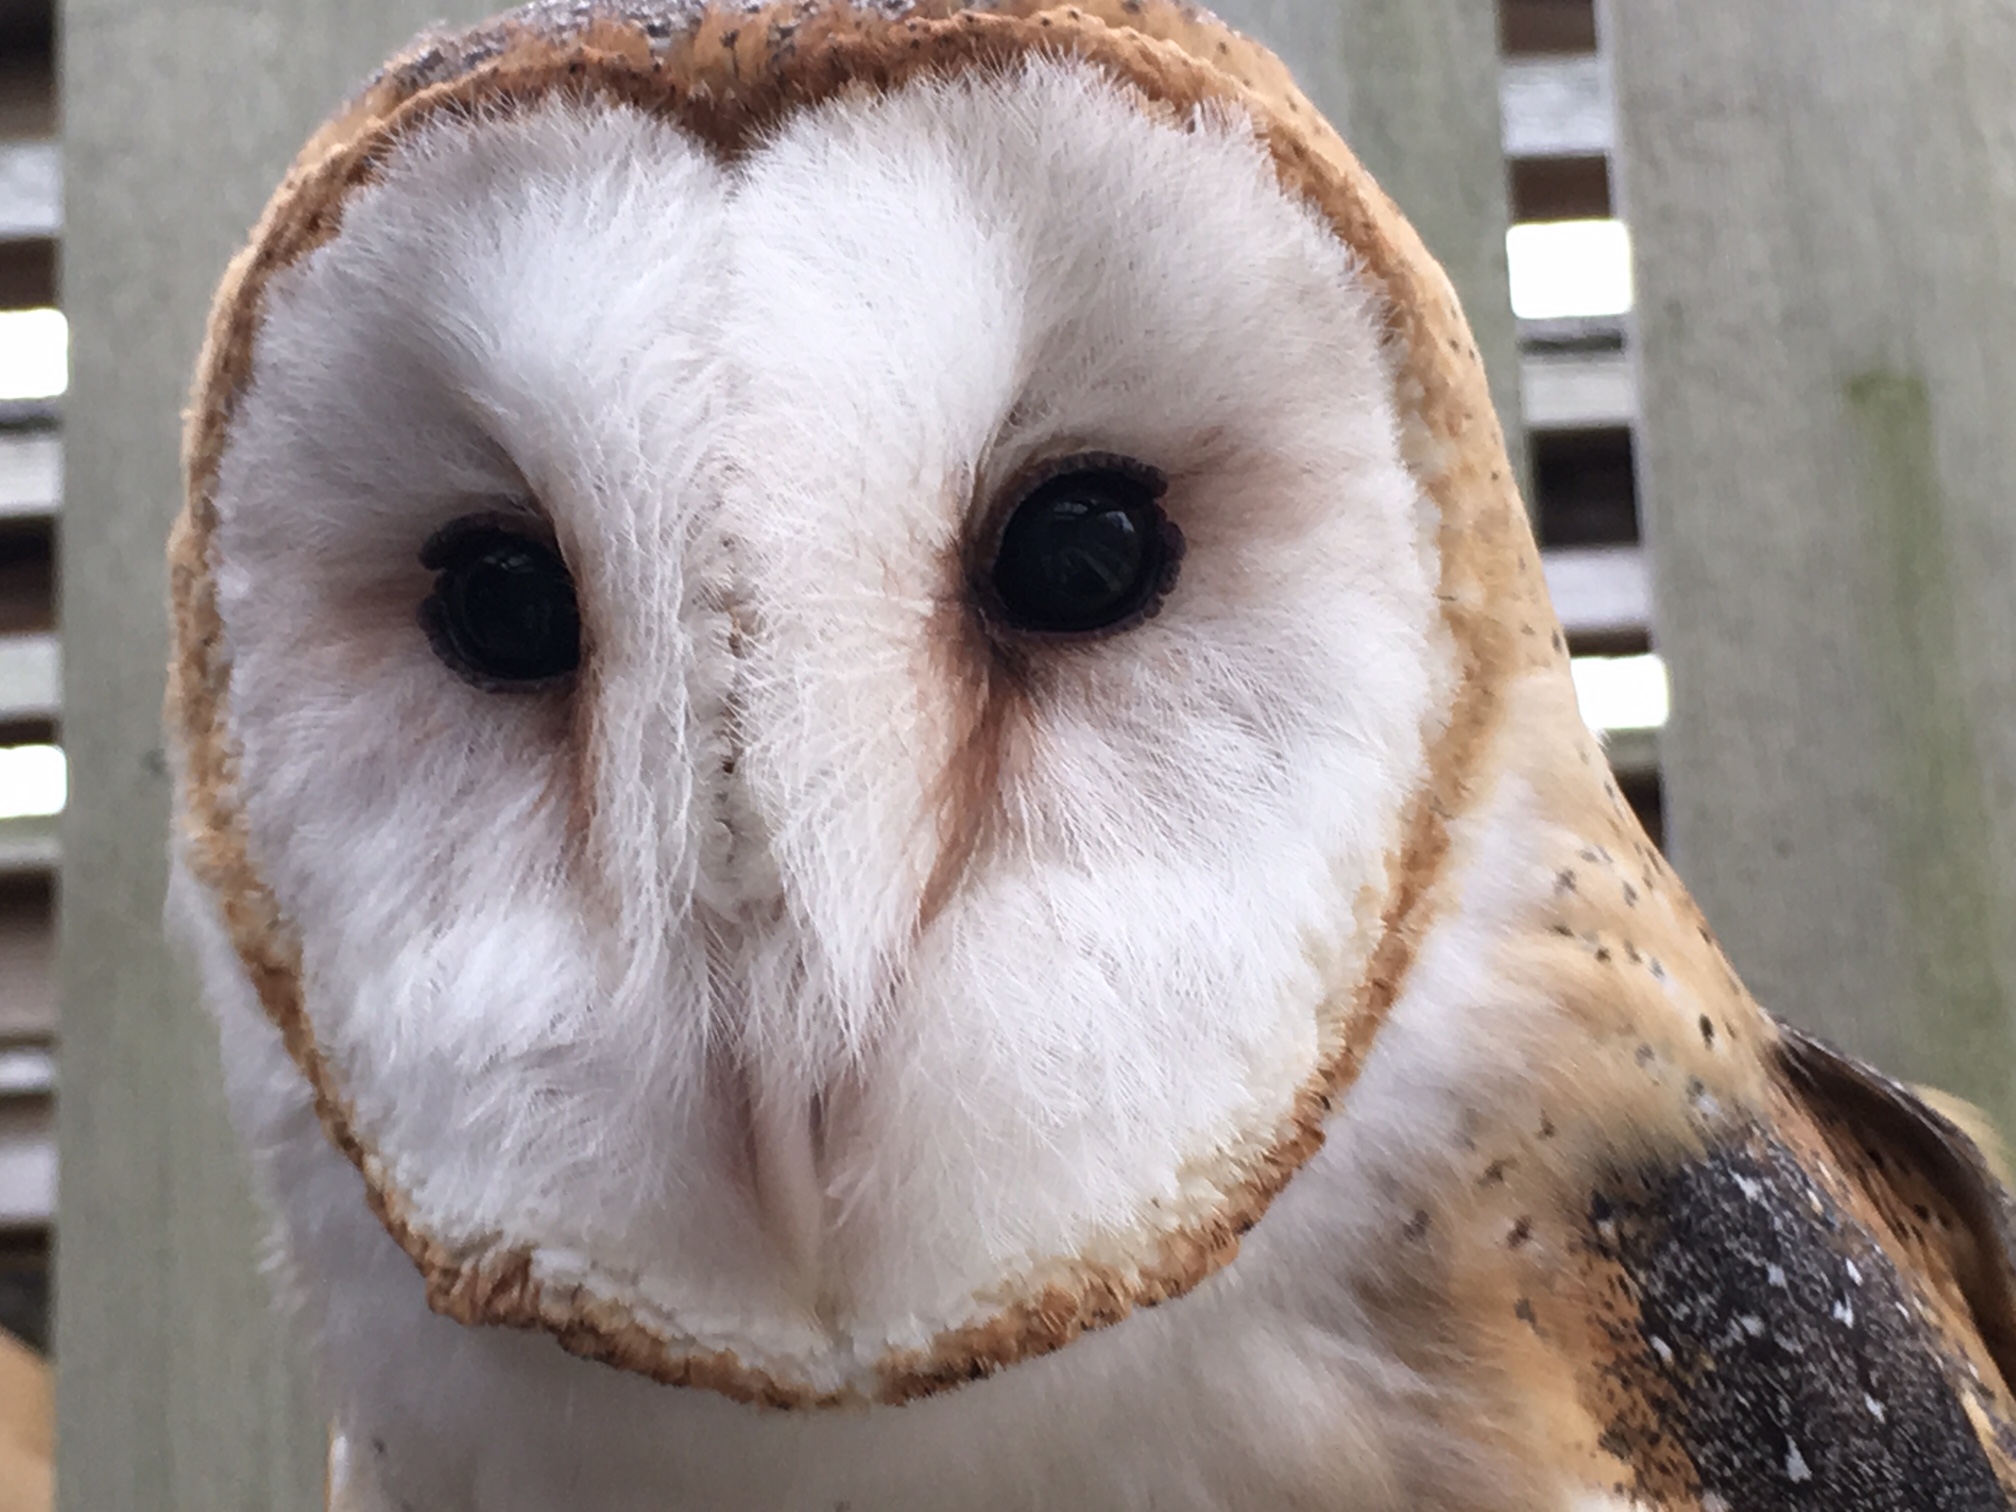 With new permit, Johns Hopkins can keep up barn owl research